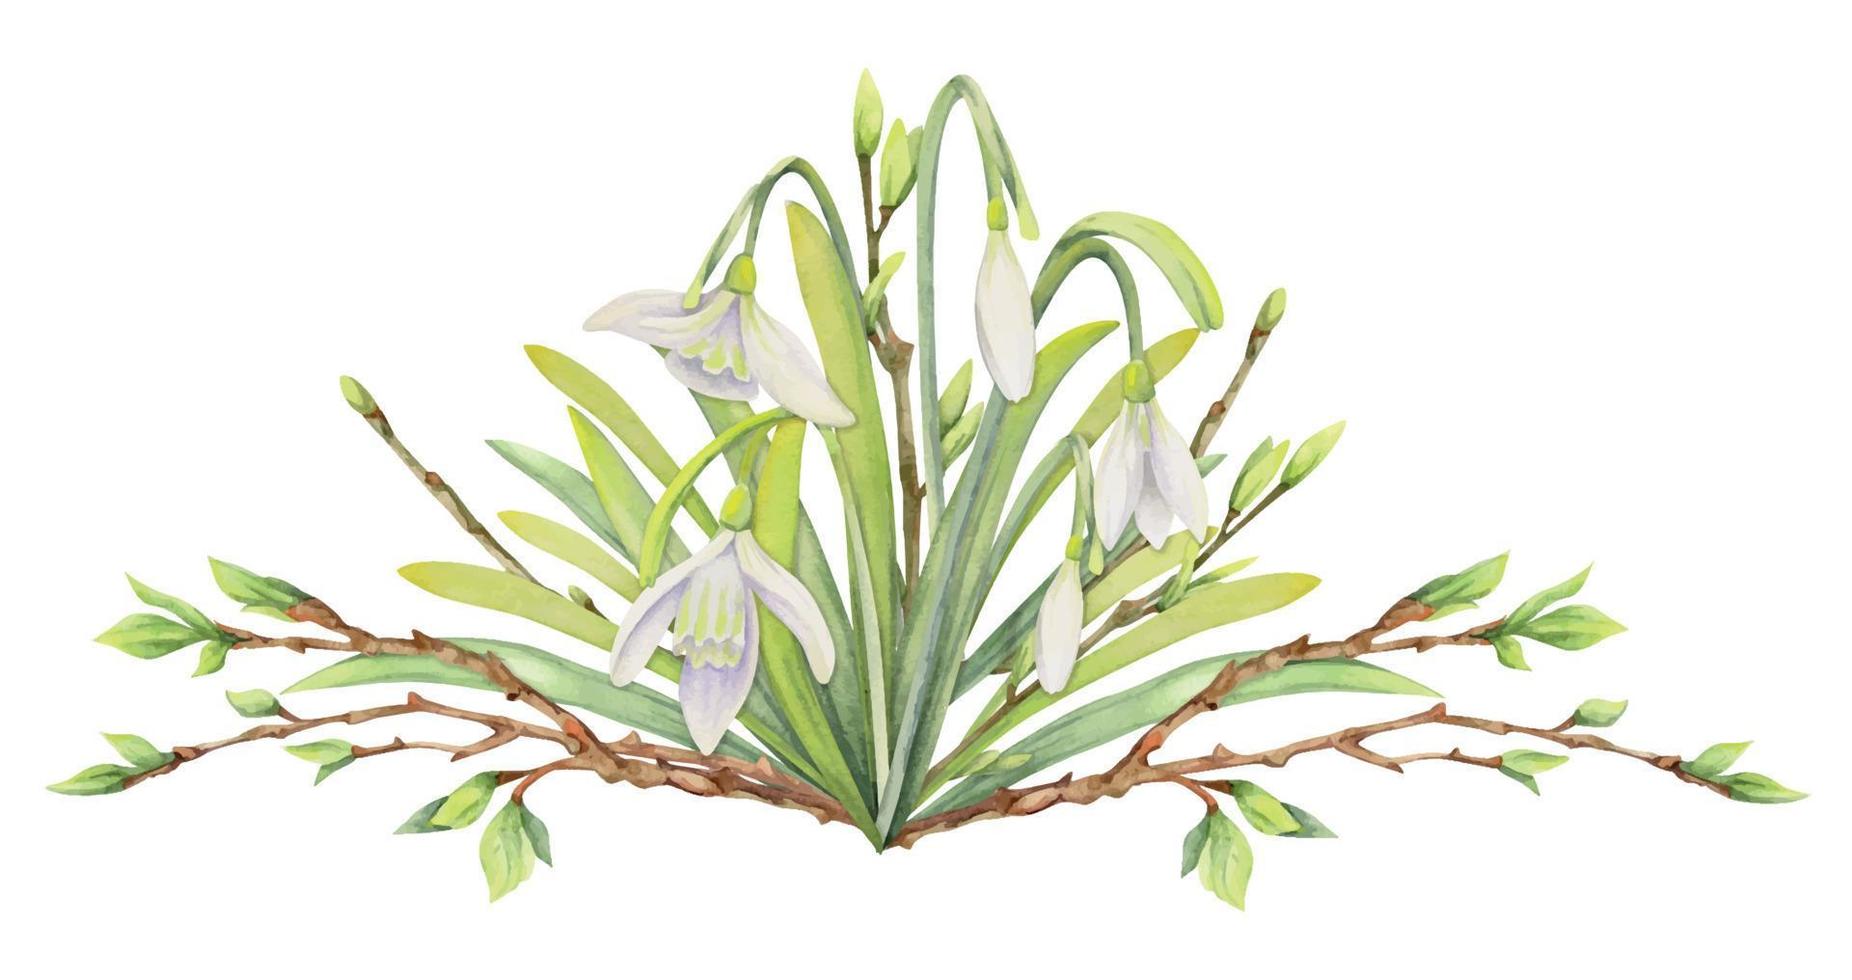 Watercolor hand drawn composition with spring flowers, snowdrops, leaves and stems, bow, gift tag. Isolated on white background. For invitations, wedding, greeting cards, wallpaper, print, textile. vector